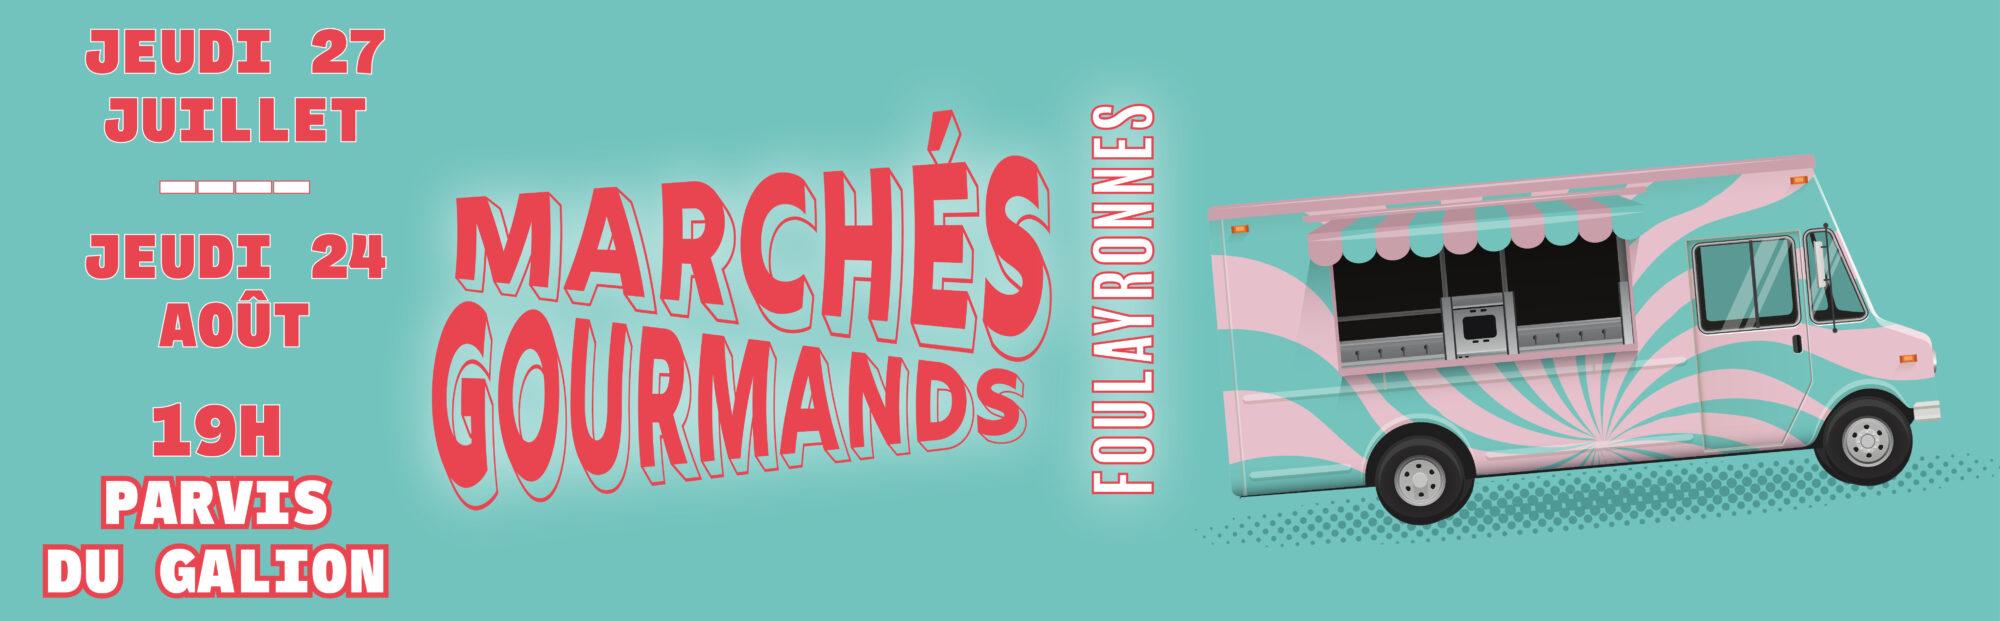 Marches gourmands1900 X590 2023